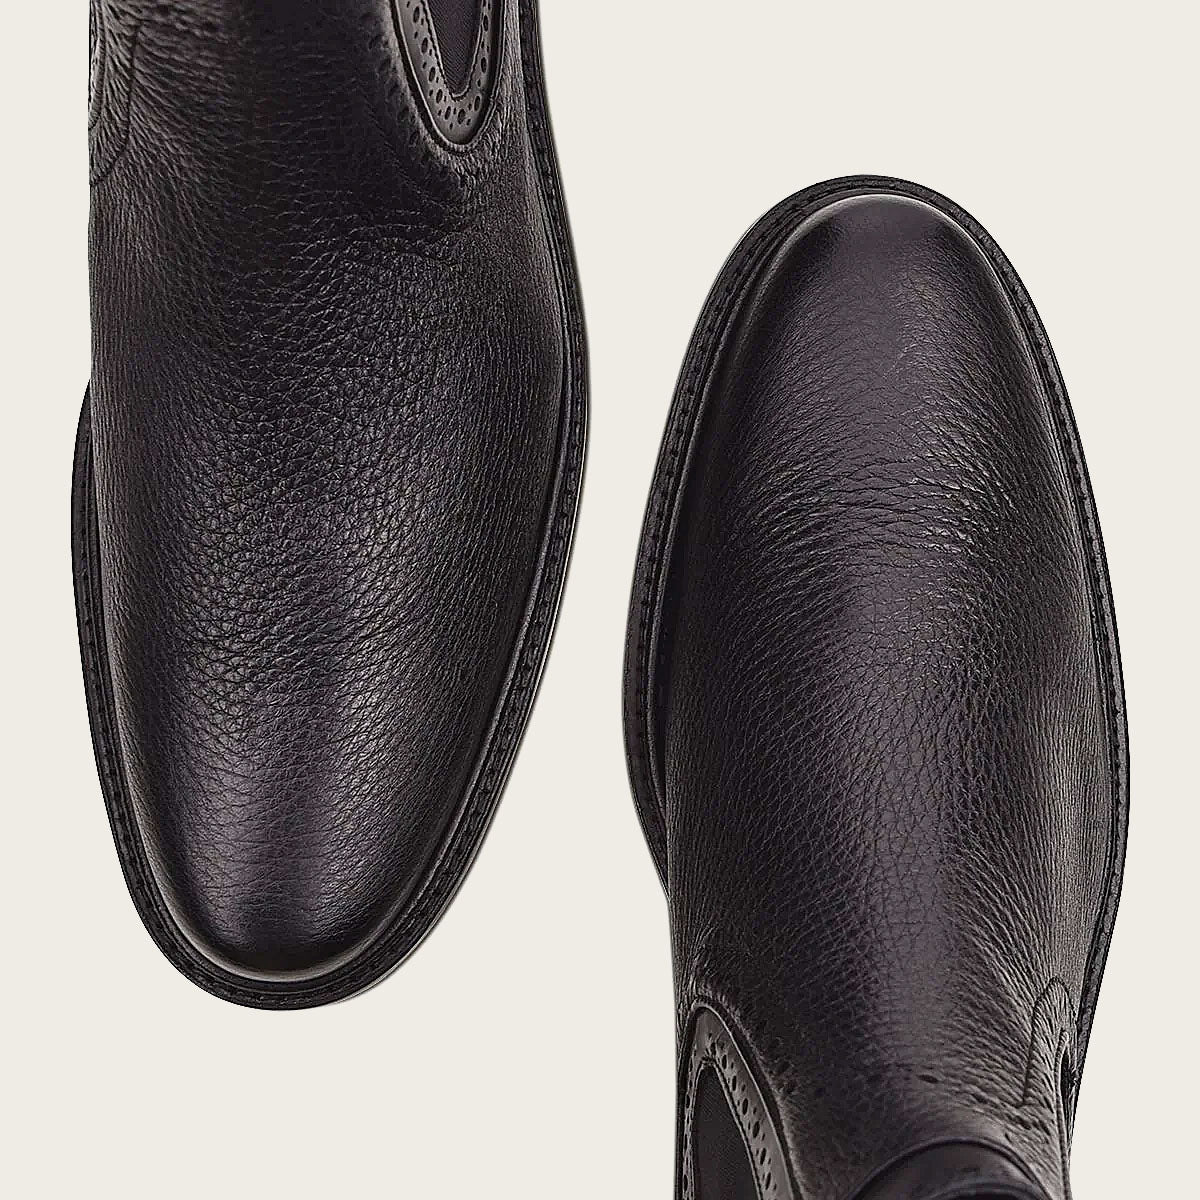 Image of a sleek and minimalistic black deer bootie, perfect for any outfit.